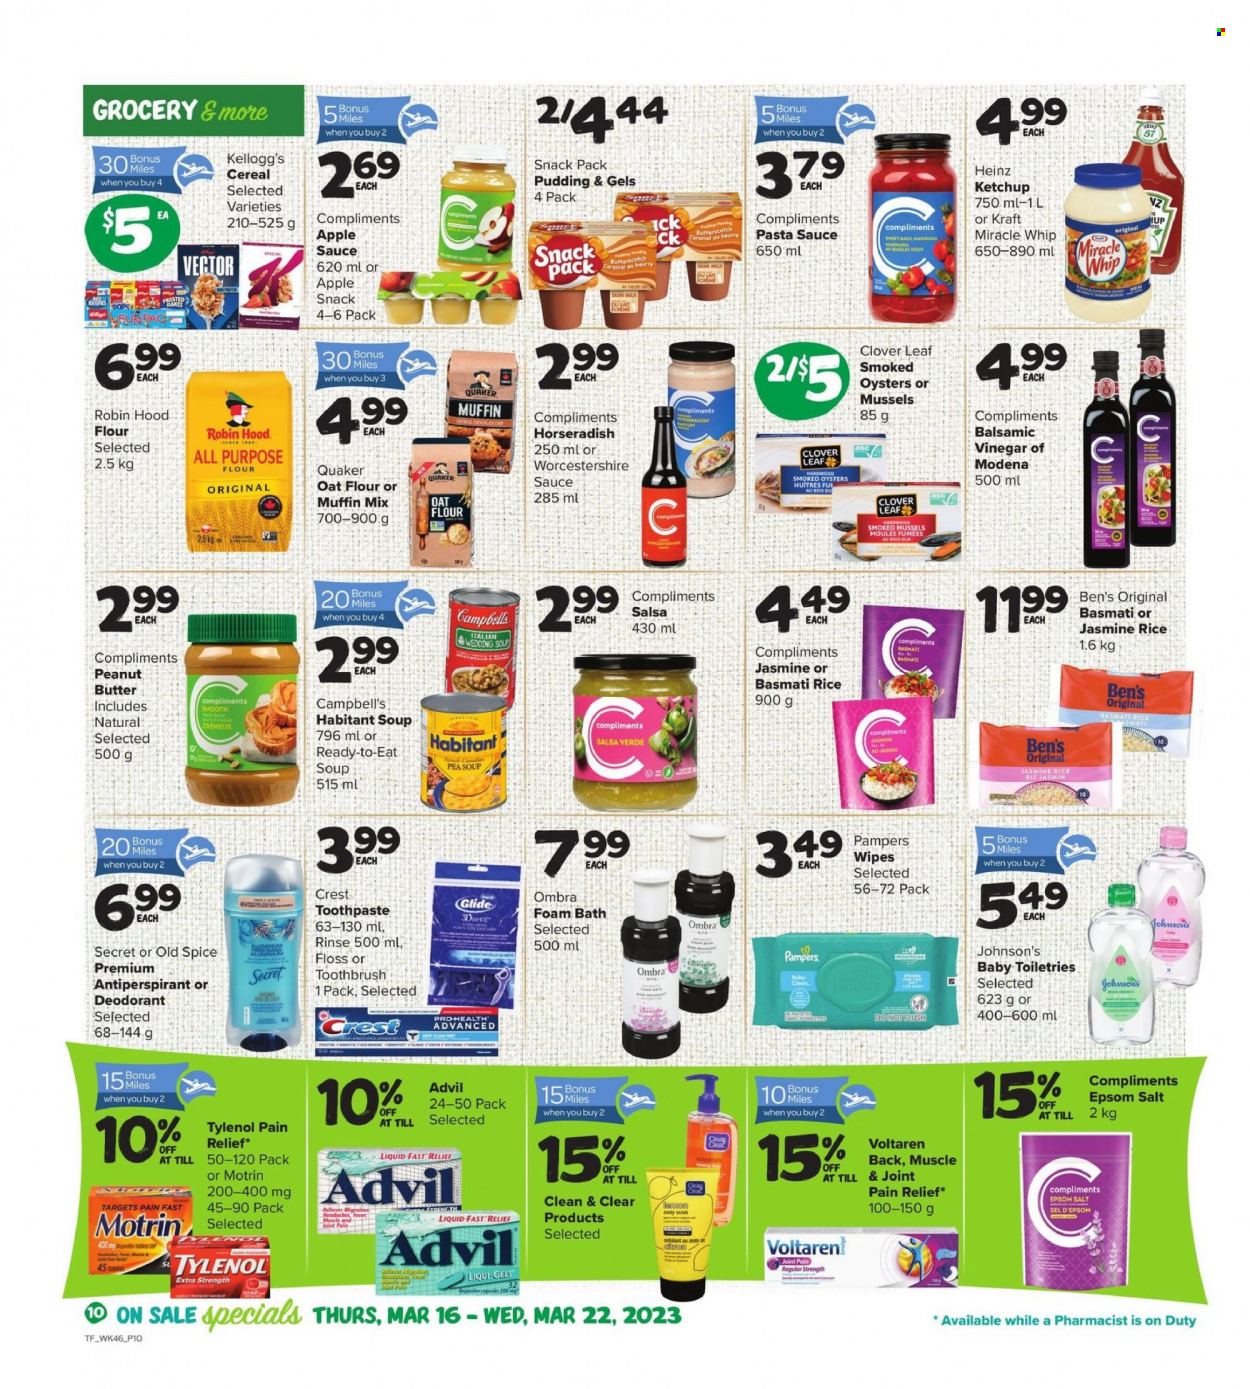 thumbnail - Thrifty Foods Flyer - March 16, 2023 - March 22, 2023 - Sales products - muffin mix, horseradish, mussels, smoked oysters, oysters, Campbell's, pasta sauce, soup, Quaker, Kraft®, pudding, Clover, milk, Miracle Whip, butterscotch, chocolate, Kellogg's, all purpose flour, flour, oatmeal, oats, cereals, basmati rice, rice, jasmine rice, spice, caramel, worcestershire sauce, salsa, balsamic vinegar, vinegar, apple sauce, peanut butter, wipes, Pampers, Johnson's, bath foam, toothbrush, toothpaste, Crest, Clean & Clear, anti-perspirant, sunflower, pain relief, Tylenol, Advil Rapid, Motrin, Heinz, ketchup, Old Spice, deodorant. Page 10.